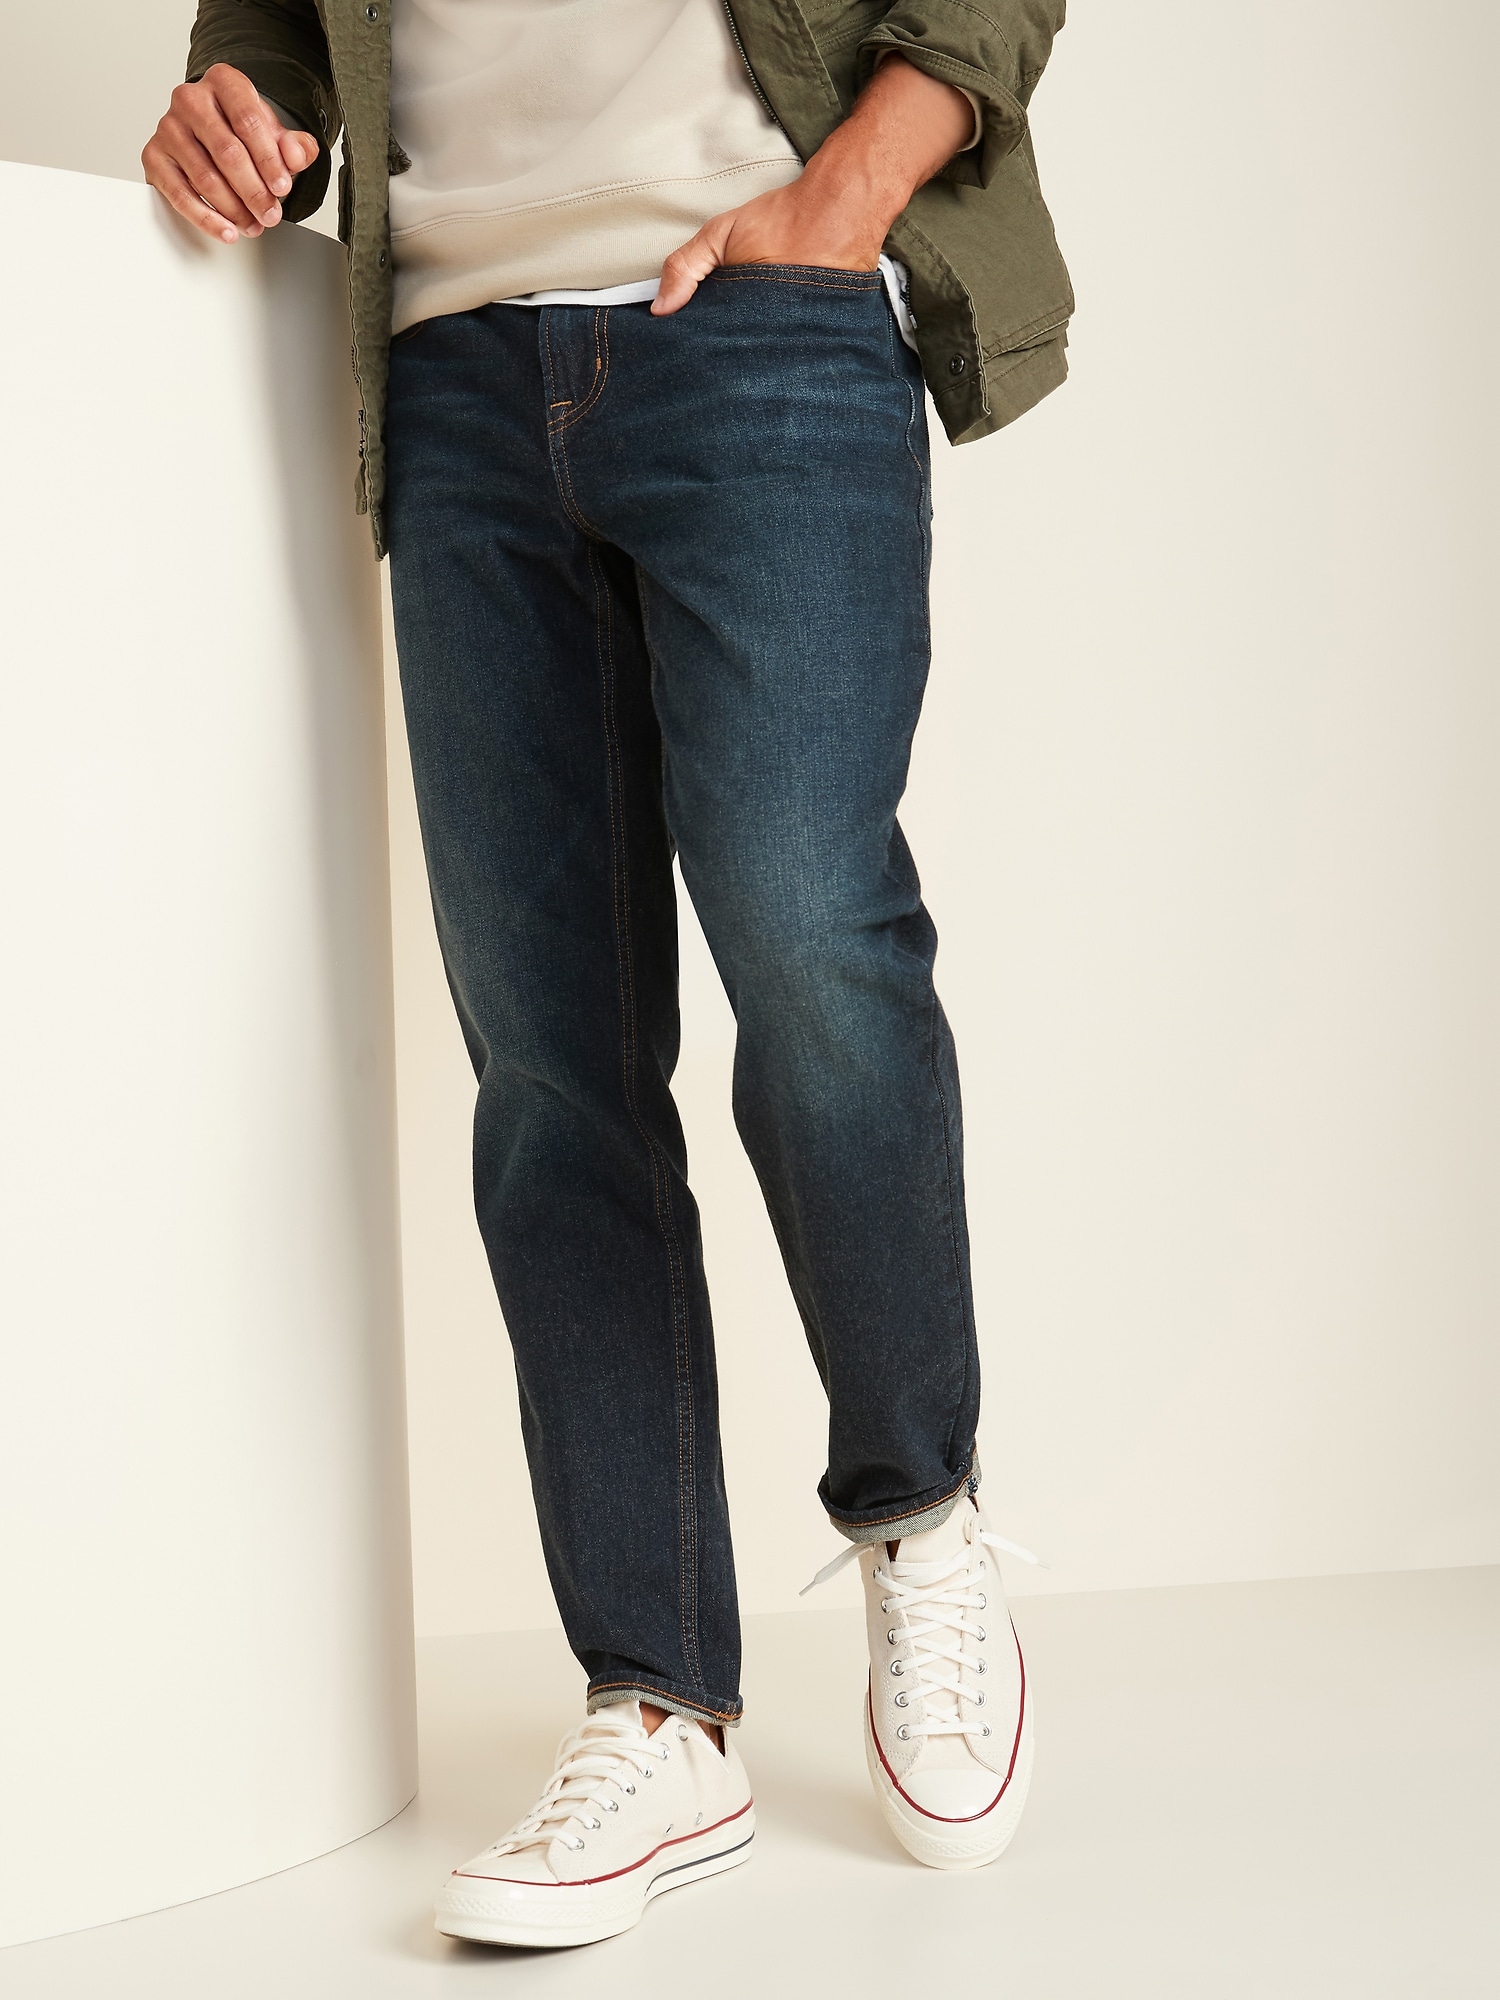 athletic tapered jeans